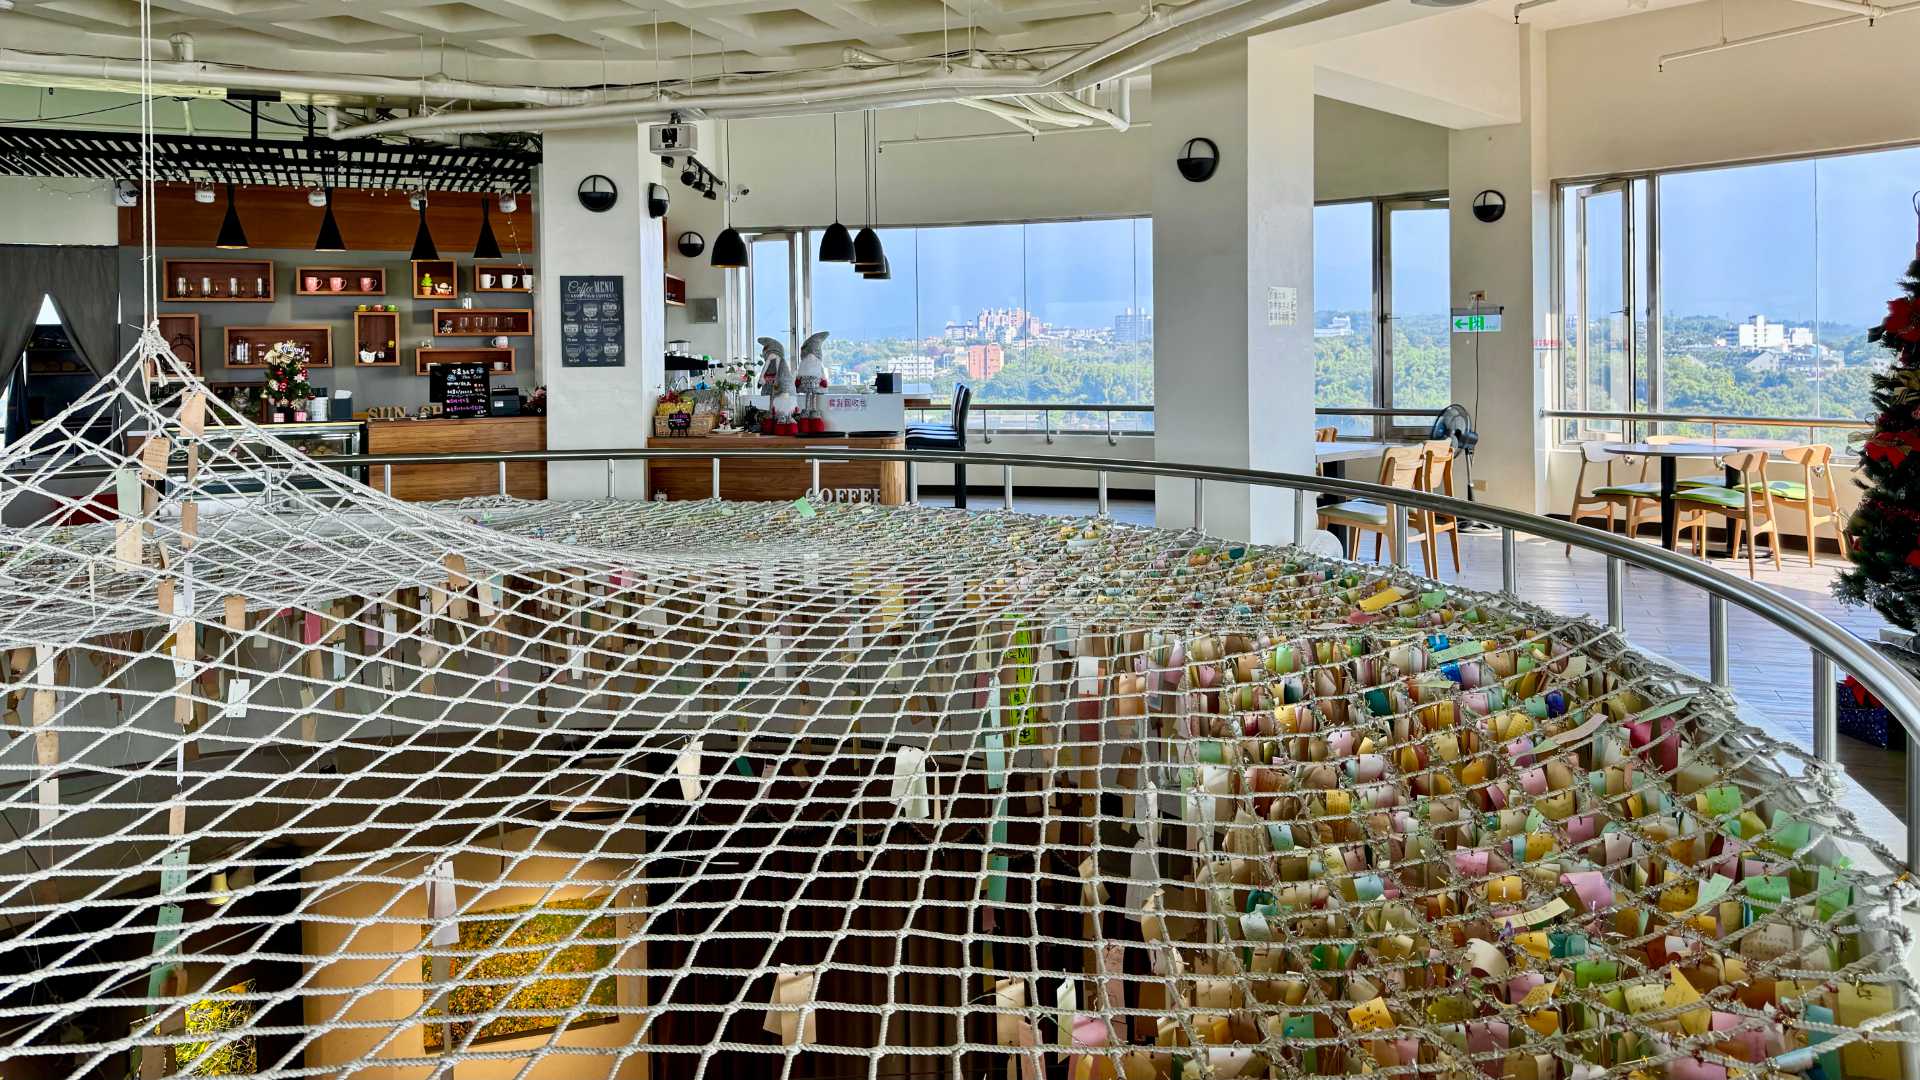 The cafe on level 11 of Sun-Shooting Tower in Chiayi. The city can be seen through large windows, and in the foreground a void space has been covered by a net, off which are hanging hundreds of colorful cards with wishes written on them.